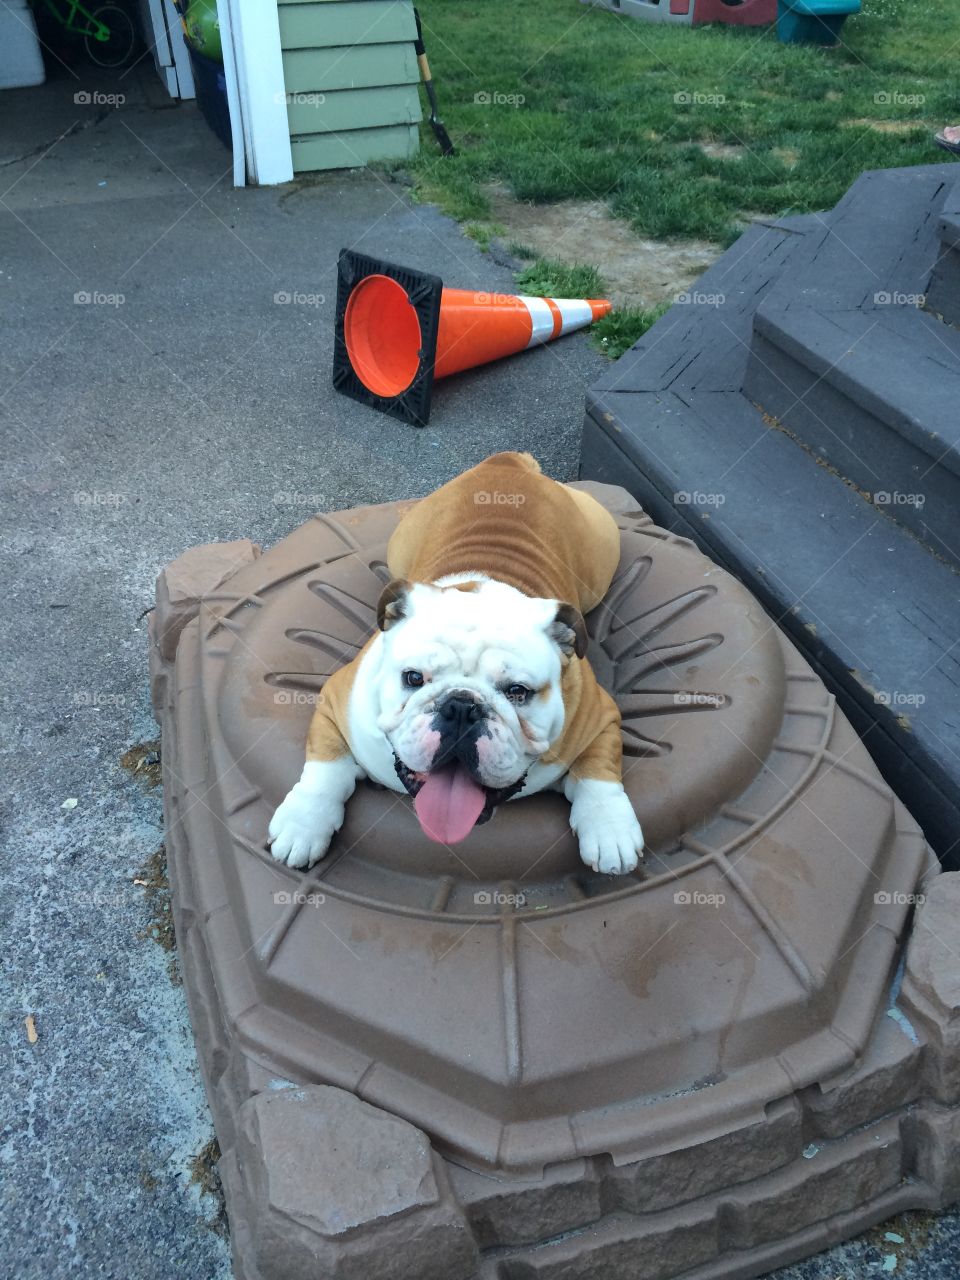 English bulldog smiling and happy to be outside chilling on the sandbox!